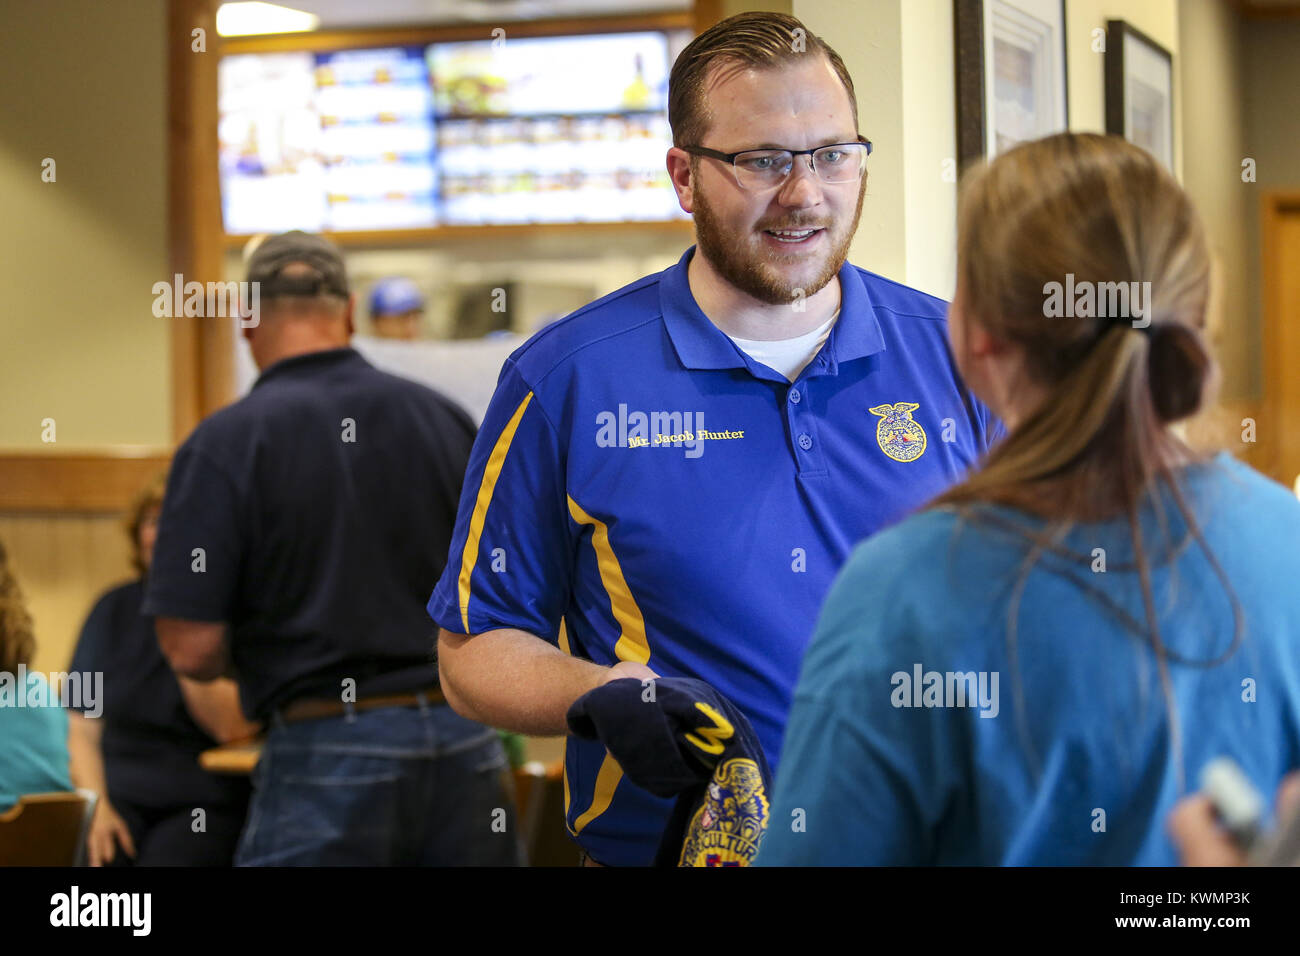 Bettendorf, Iowa, USA. 28th Sep, 2017. FFA teacher Jacob Hunter talks to a student at Culver's in Bettendorf on Thursday, September 28, 2017. North Scott FFA and agricultural students held a fundraiser at Culver's in Bettendorf benefitting from a percentage of sales from the night as well as having a few games for kids to learn about FFA. Credit: Andy Abeyta, Quad-City Times/Quad-City Times/ZUMA Wire/Alamy Live News Stock Photo